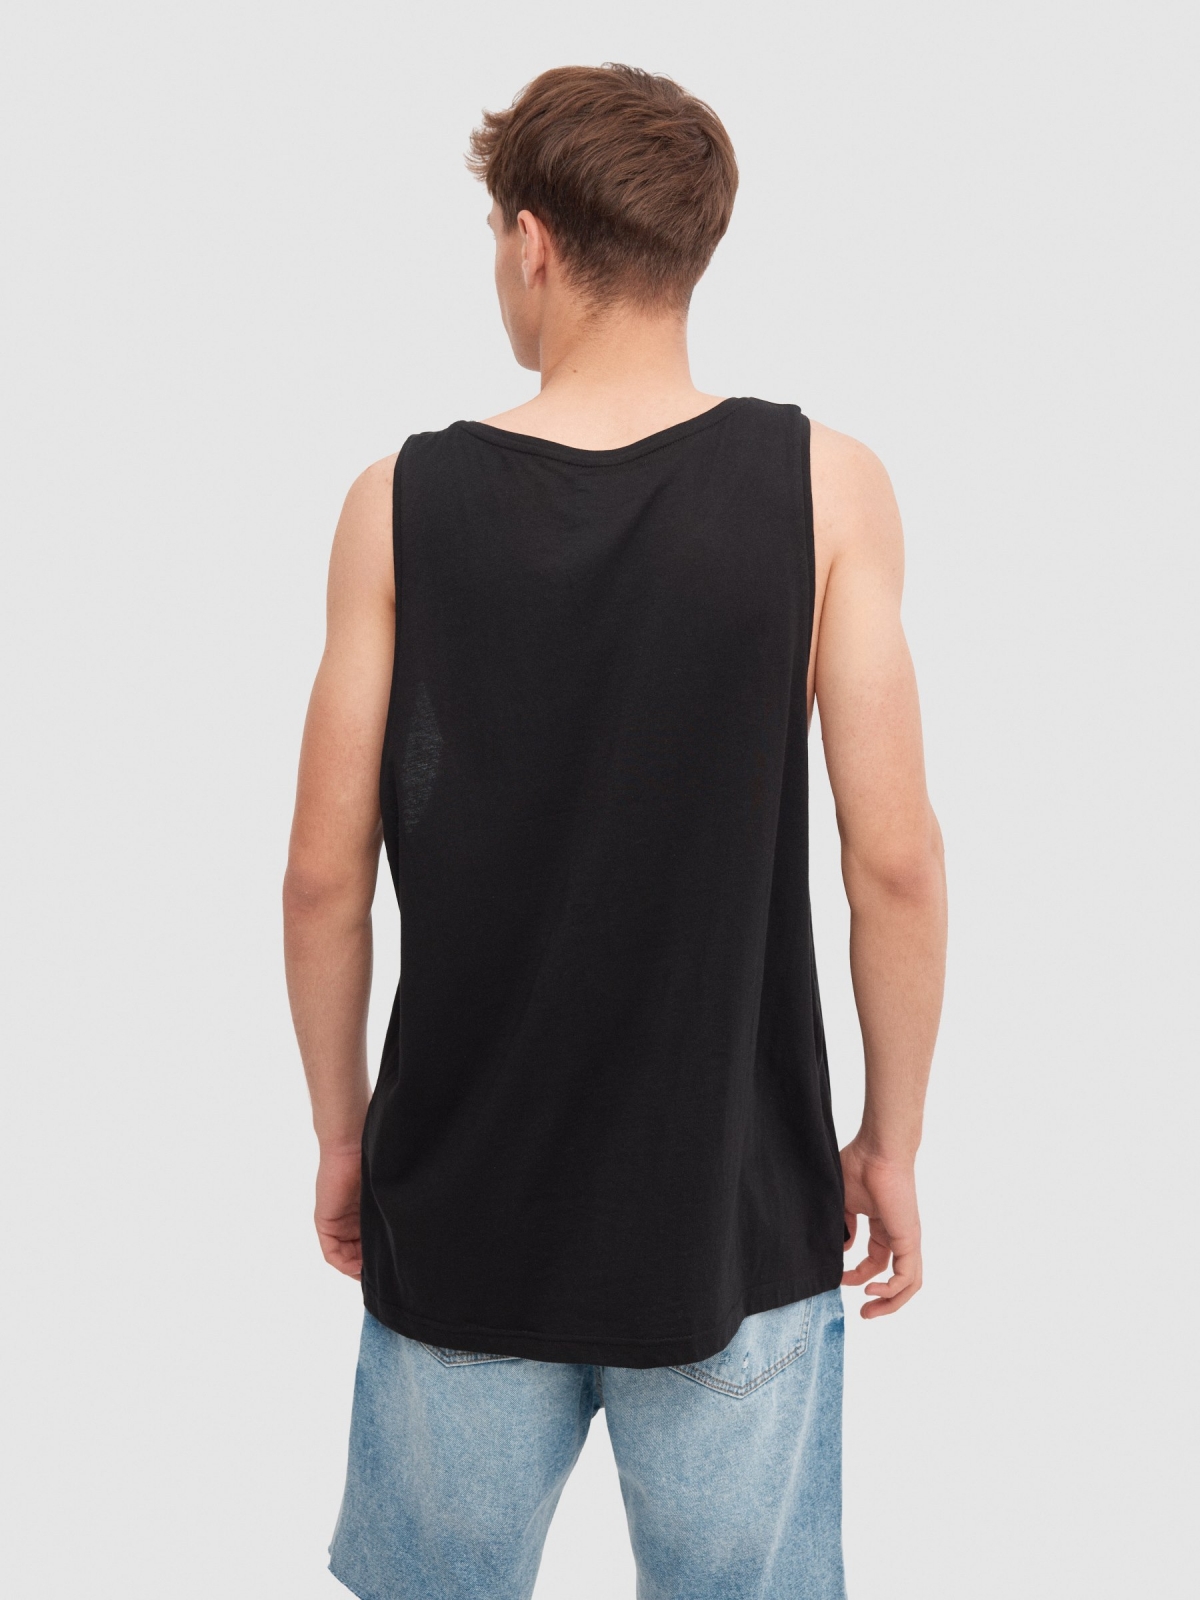 Skull tank top black middle back view